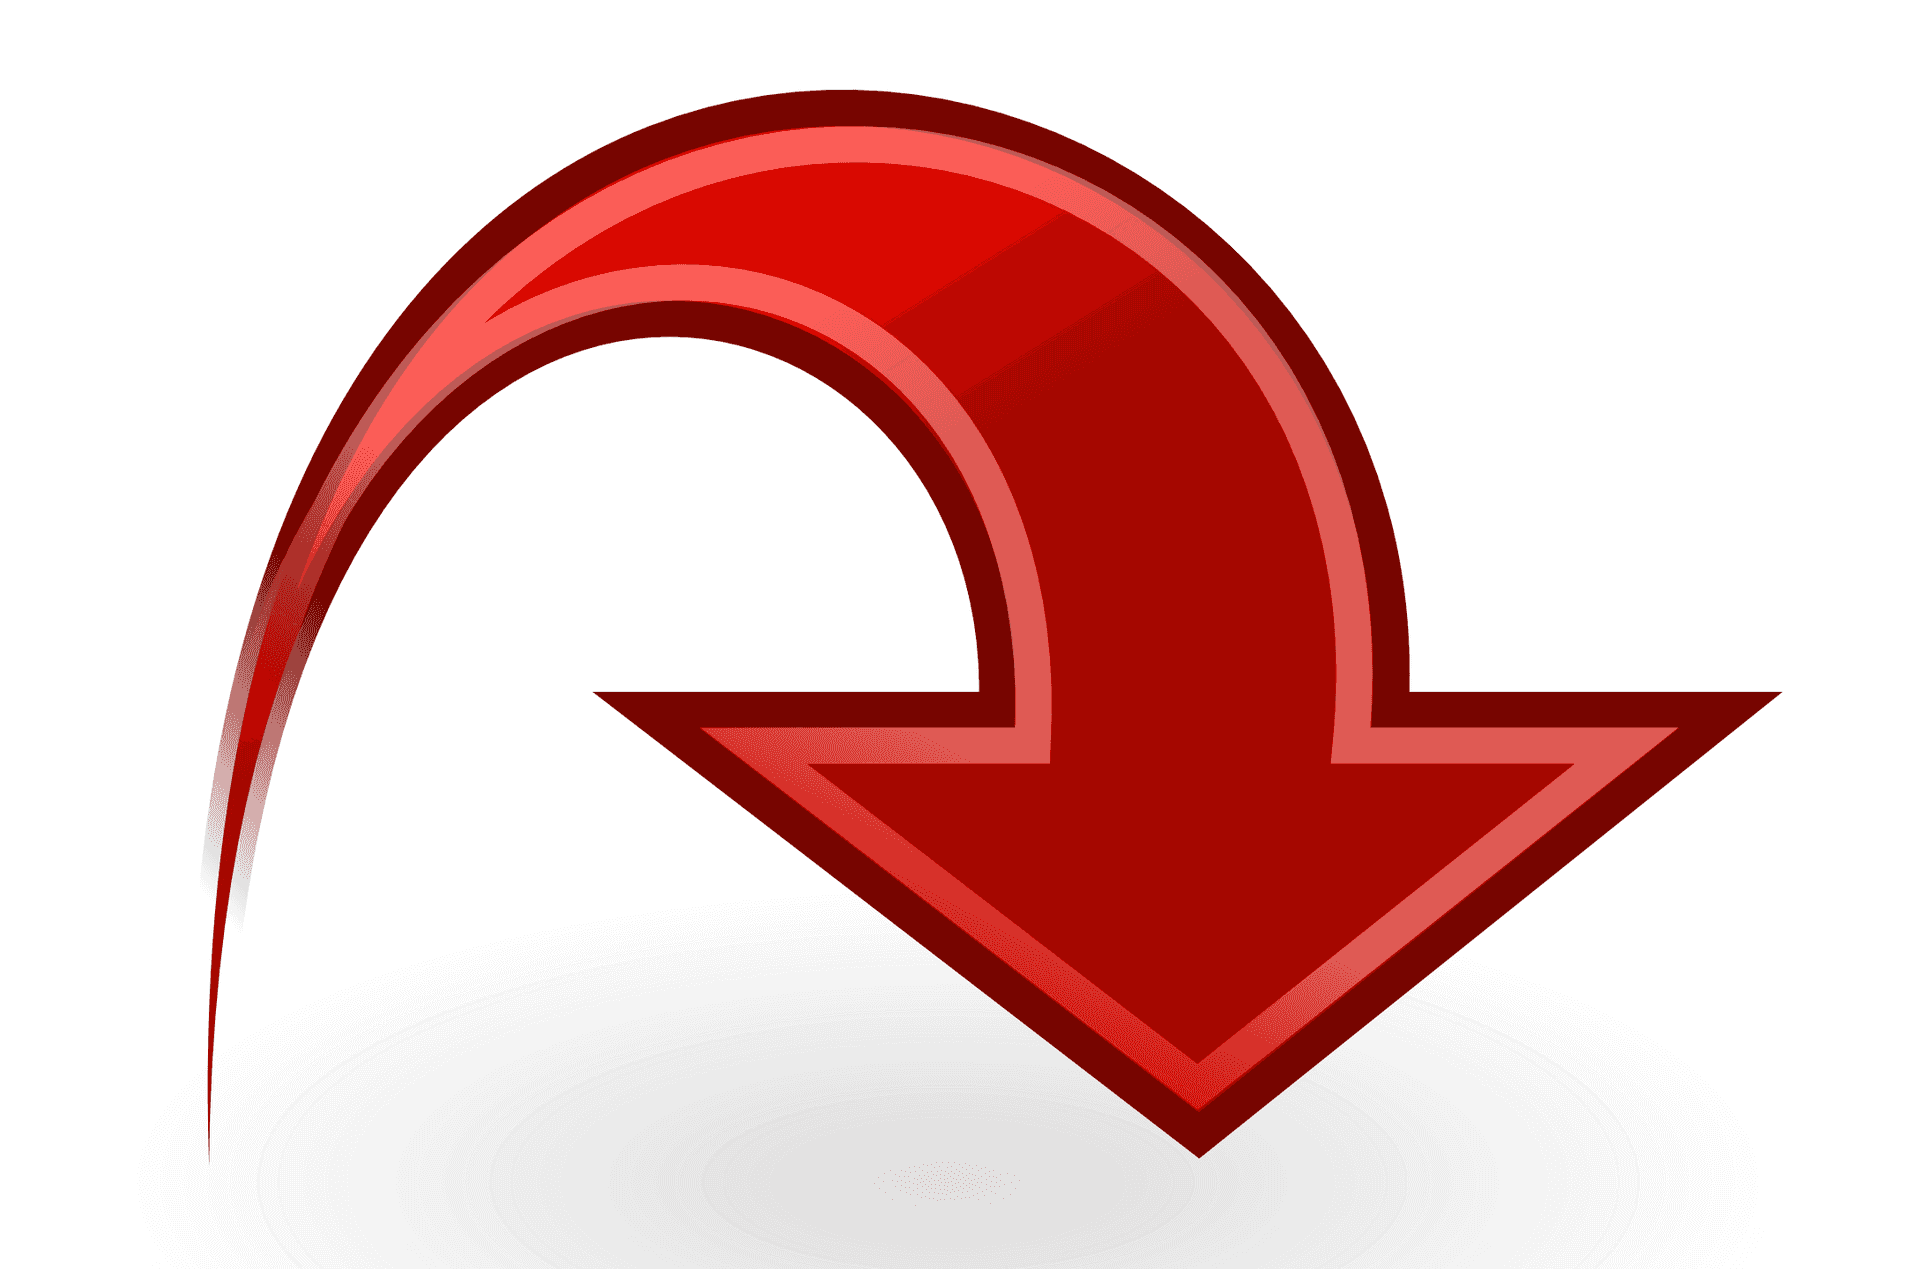 Red Downward Arrow PNG